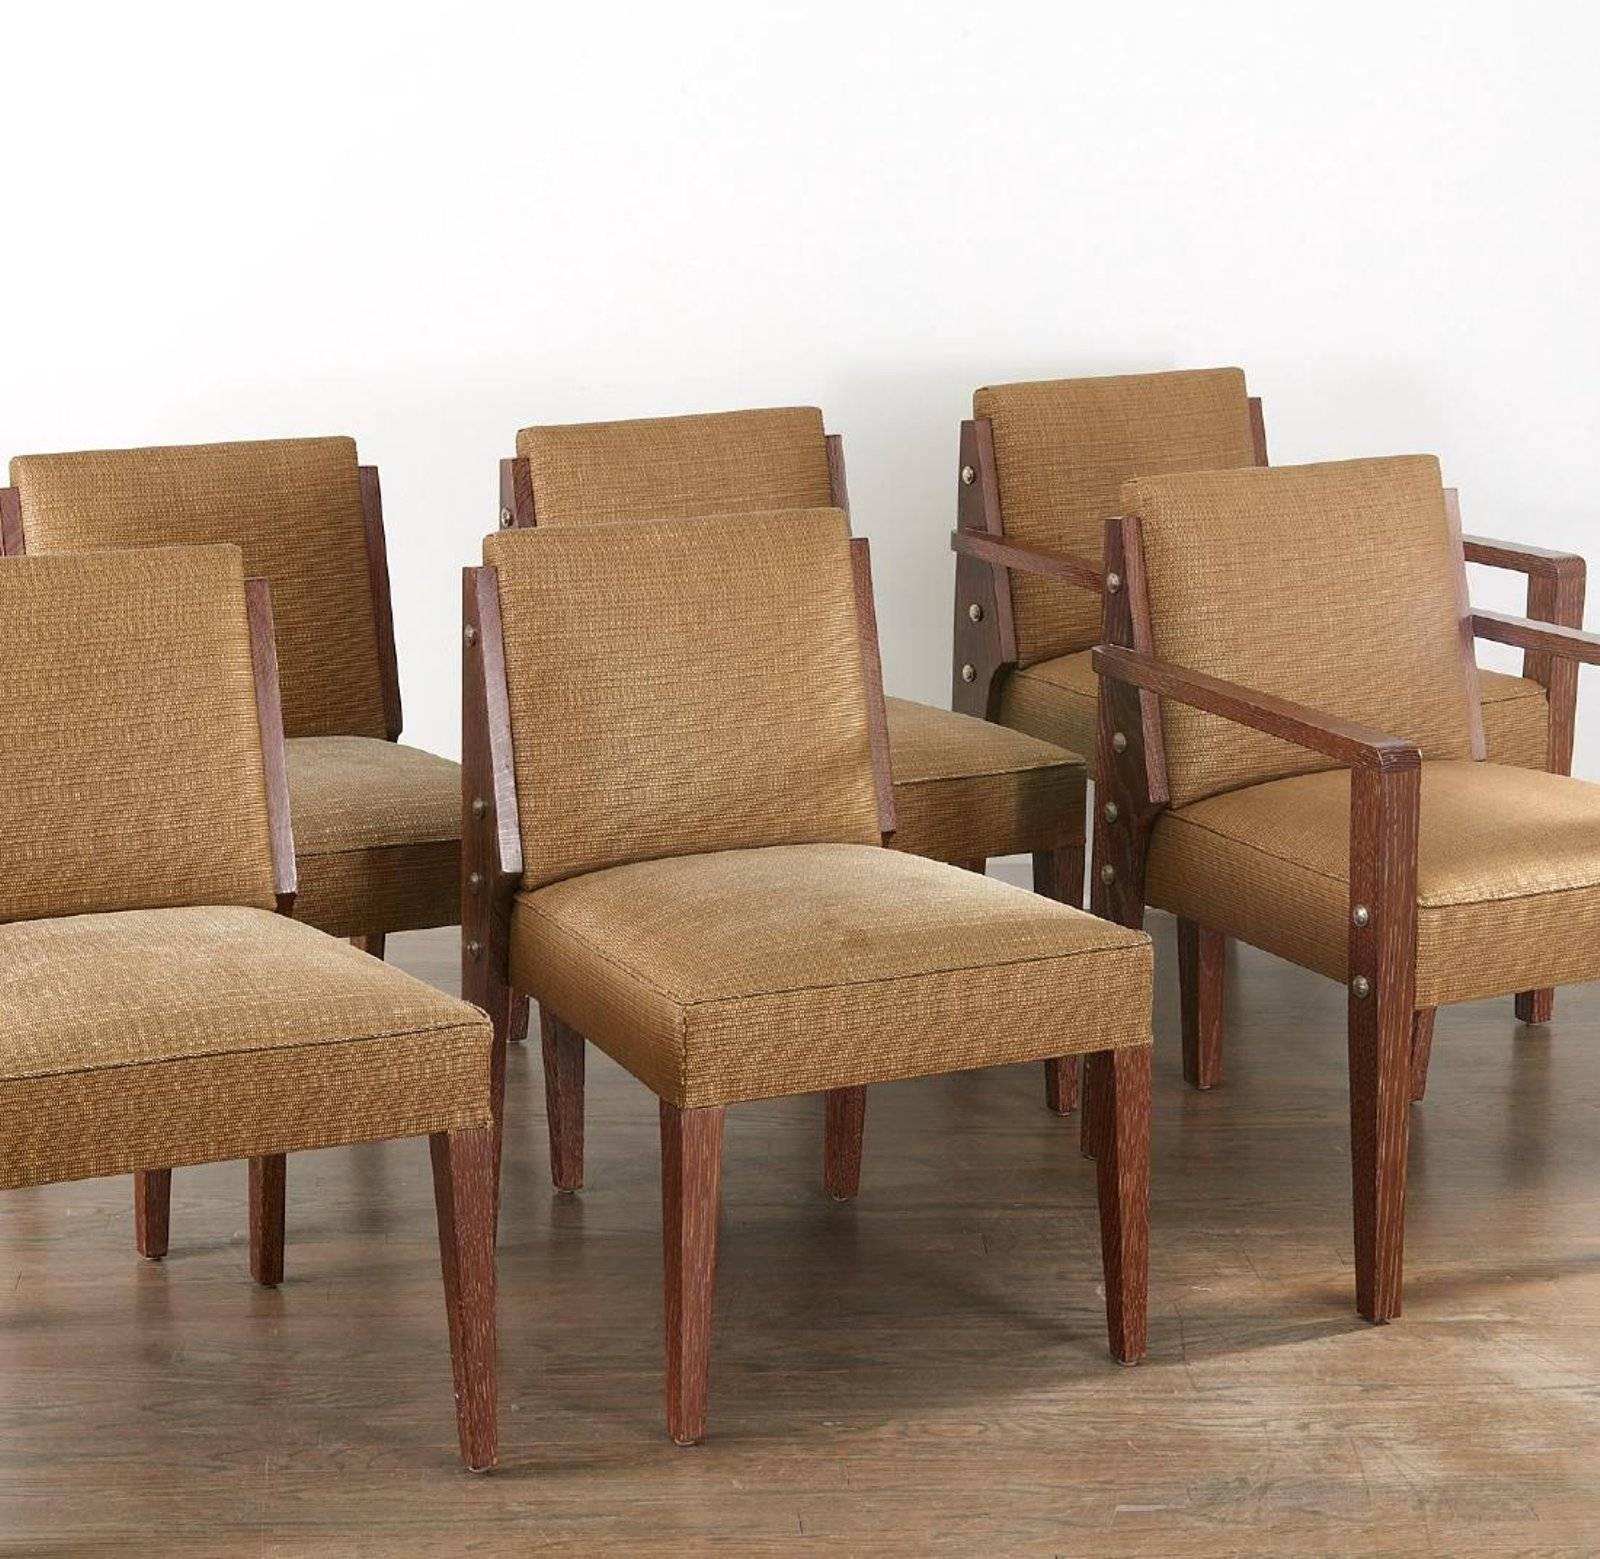 Set of six carte dining chairs in the manner of Paul Dupre Lafon and sold through Holly Hunt by Mattaliano.
Contemporary, American, midcentury inspired design in cerused oak veneer with upholstered back and seat, two armchairs and four side chairs,